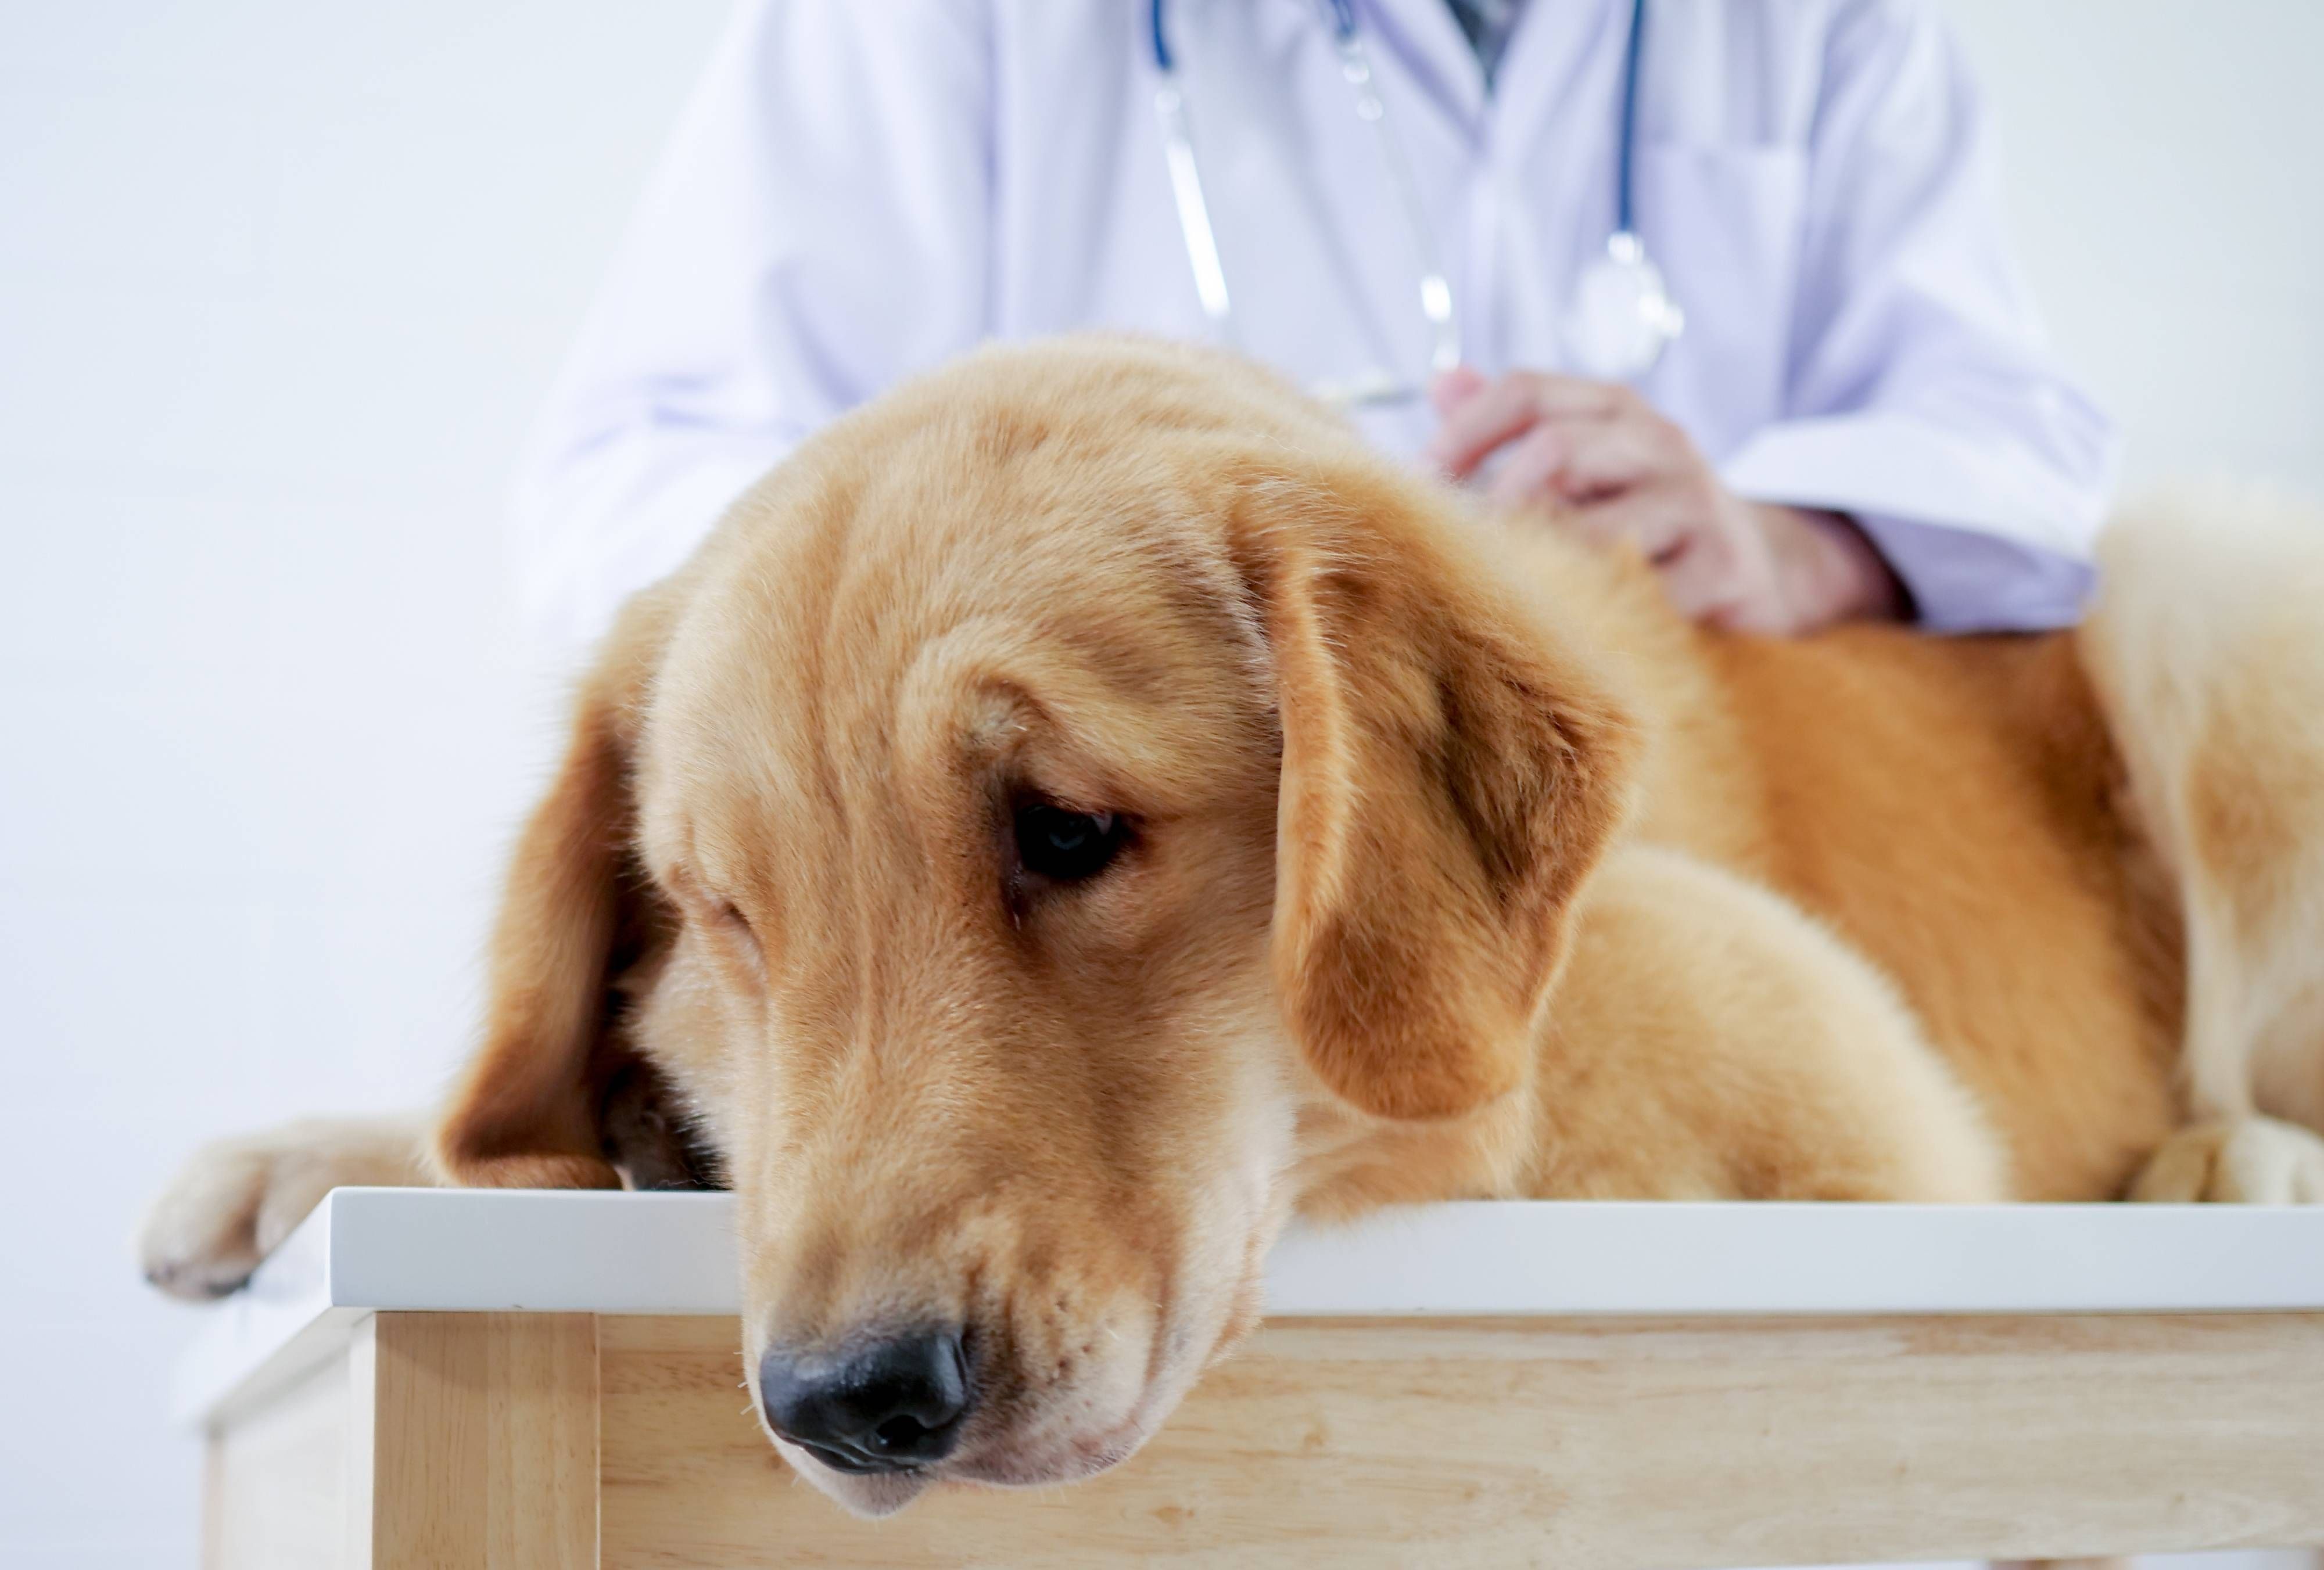 Signs & Symptoms of Poisoning in Pets